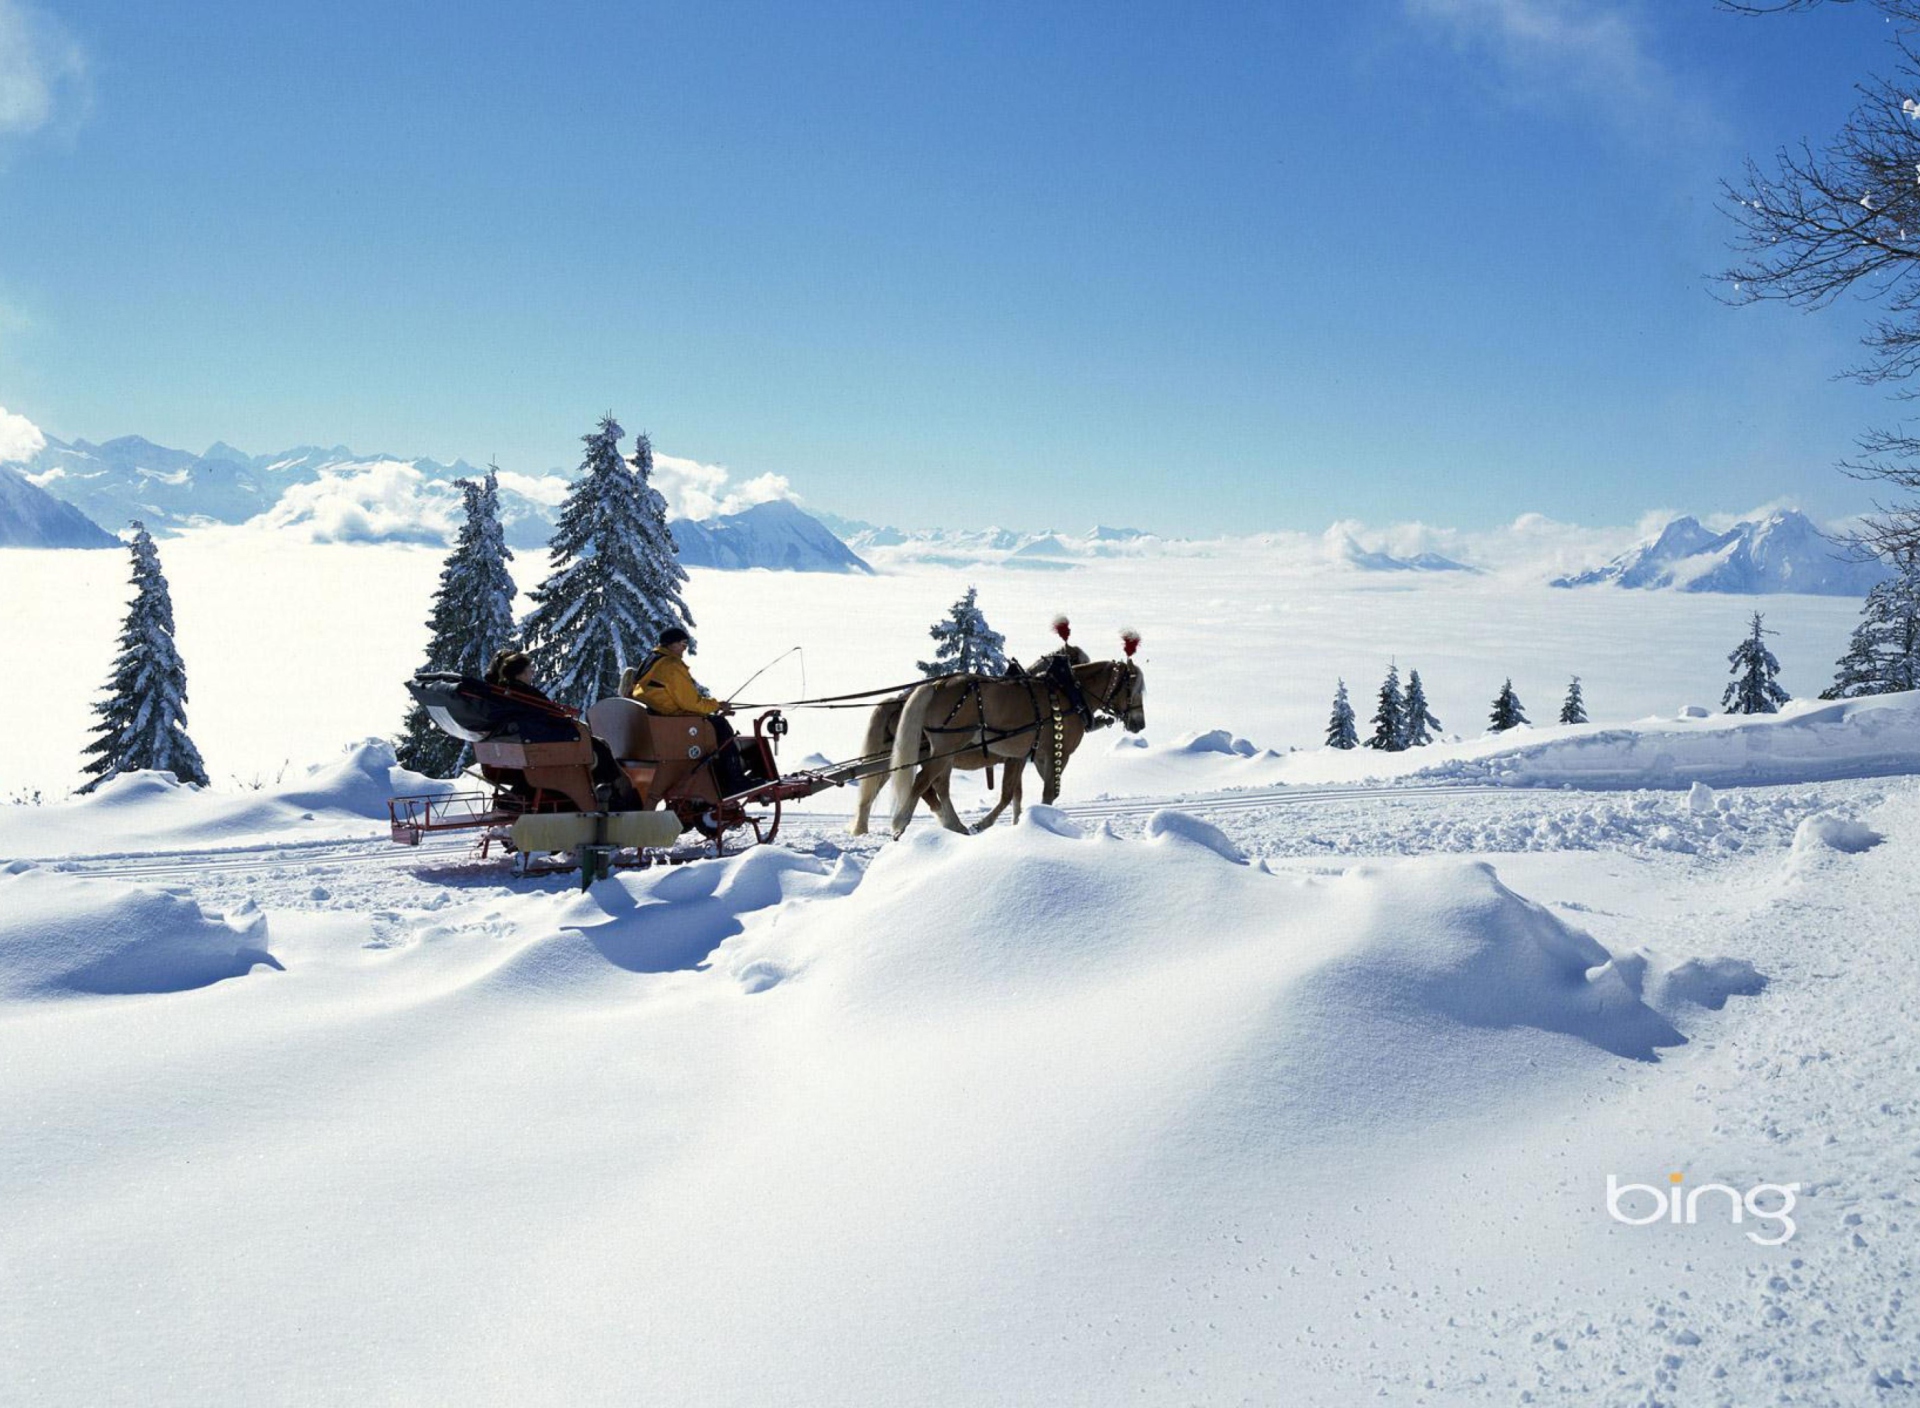 Winter Snow And Sleigh With Horses screenshot #1 1920x1408